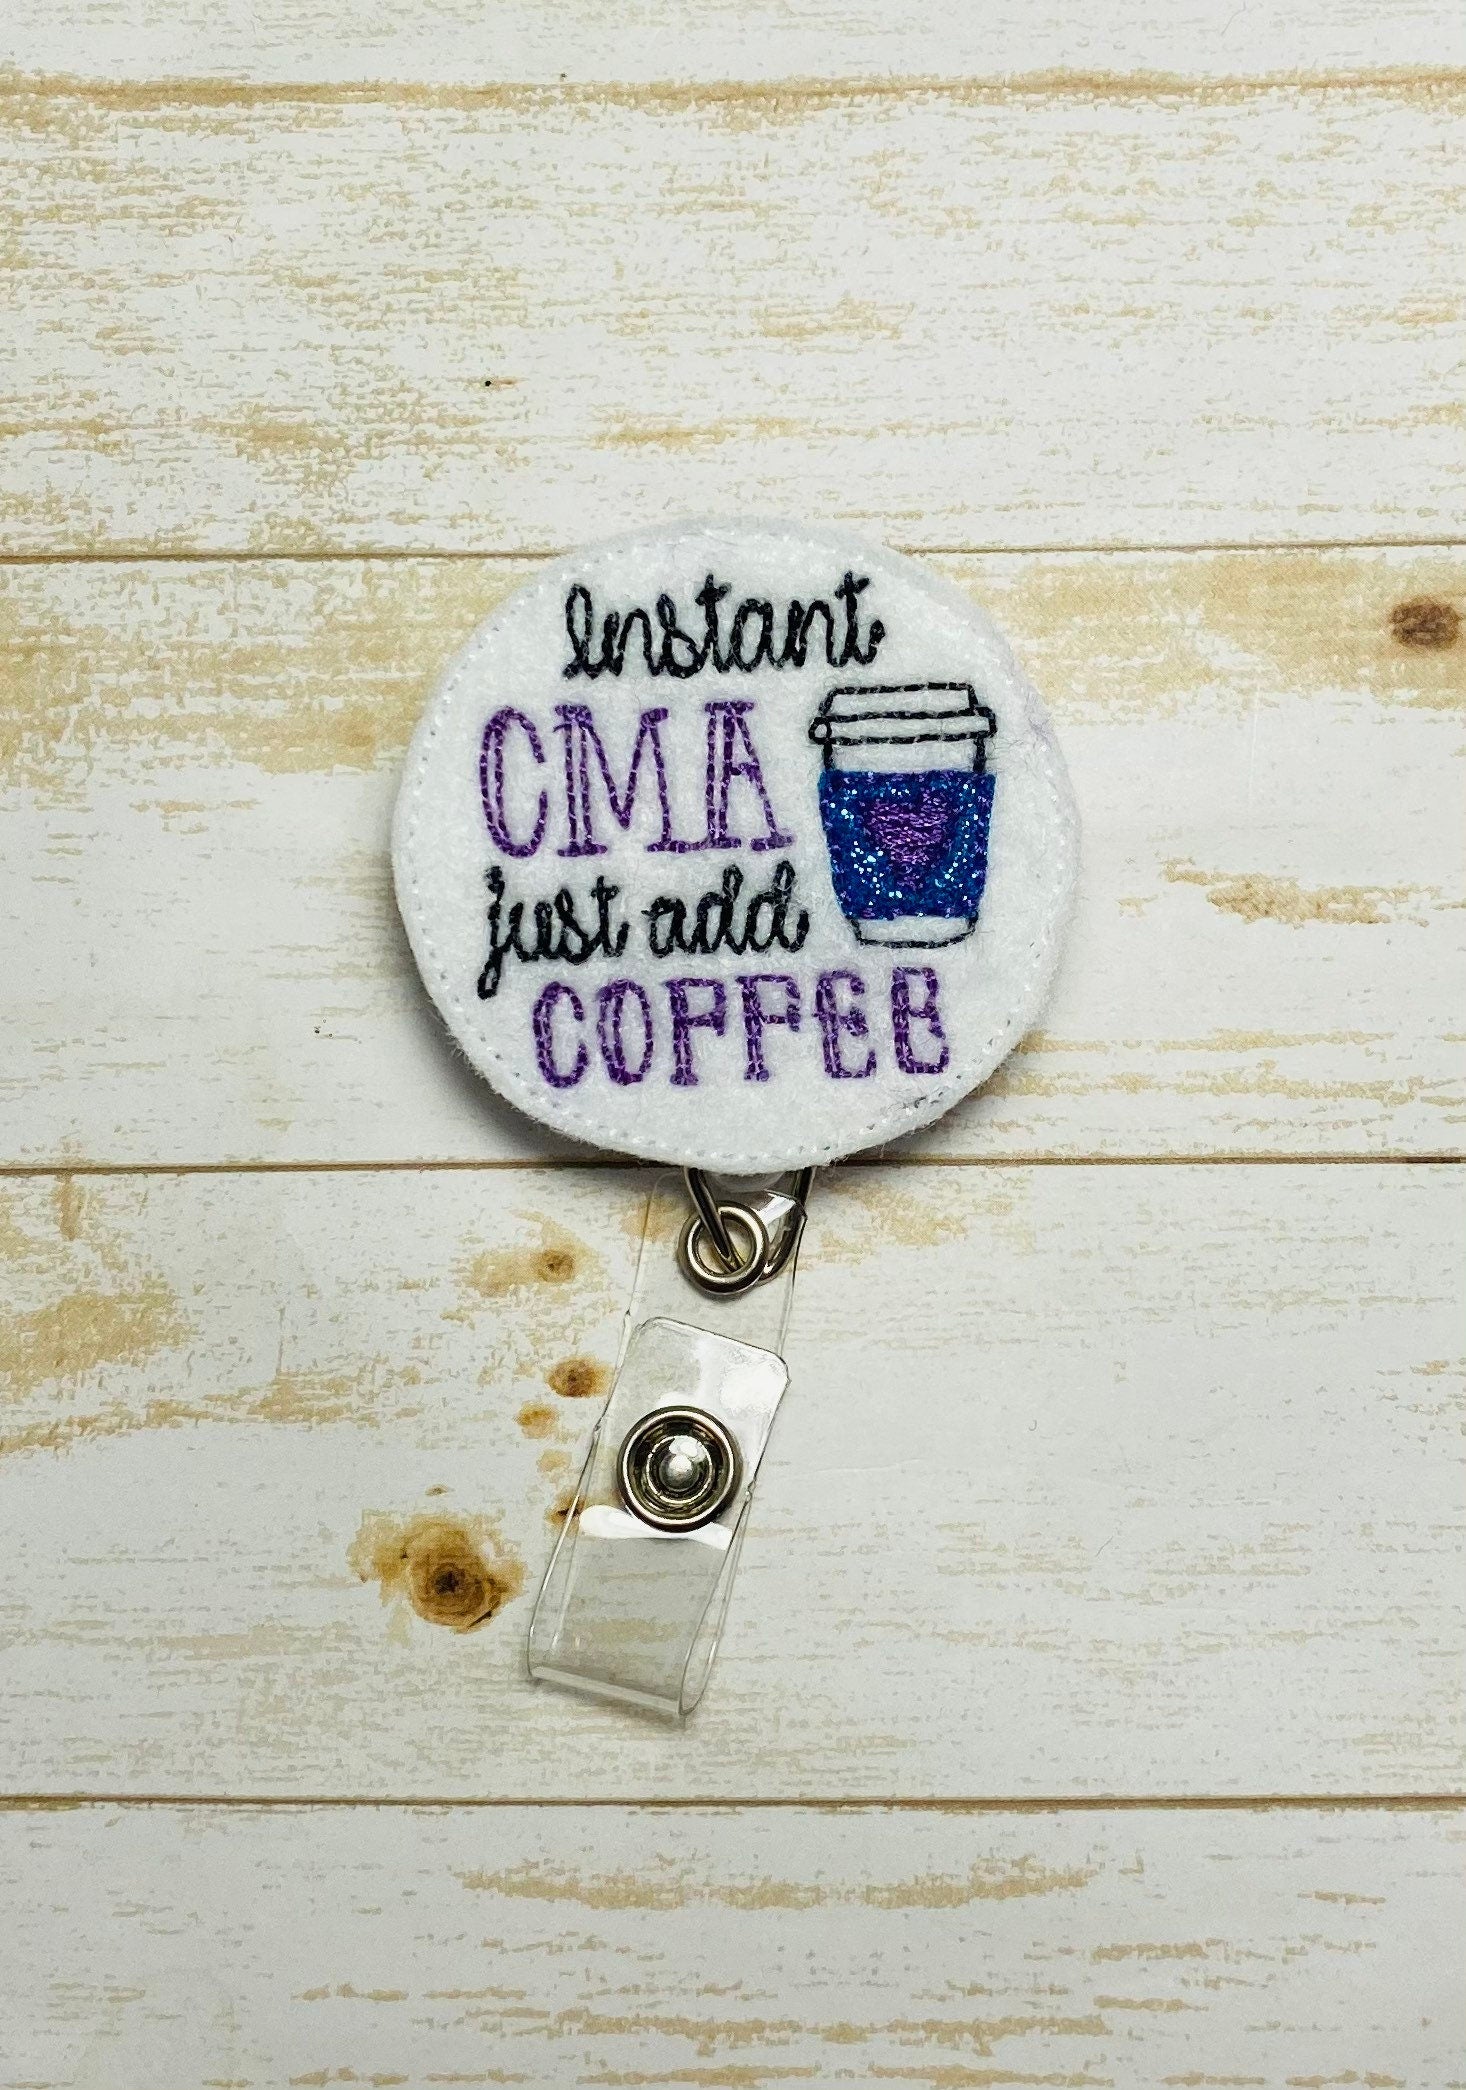 Physician Assistant Badge Reel, PA Badge Reel, Physician Associate